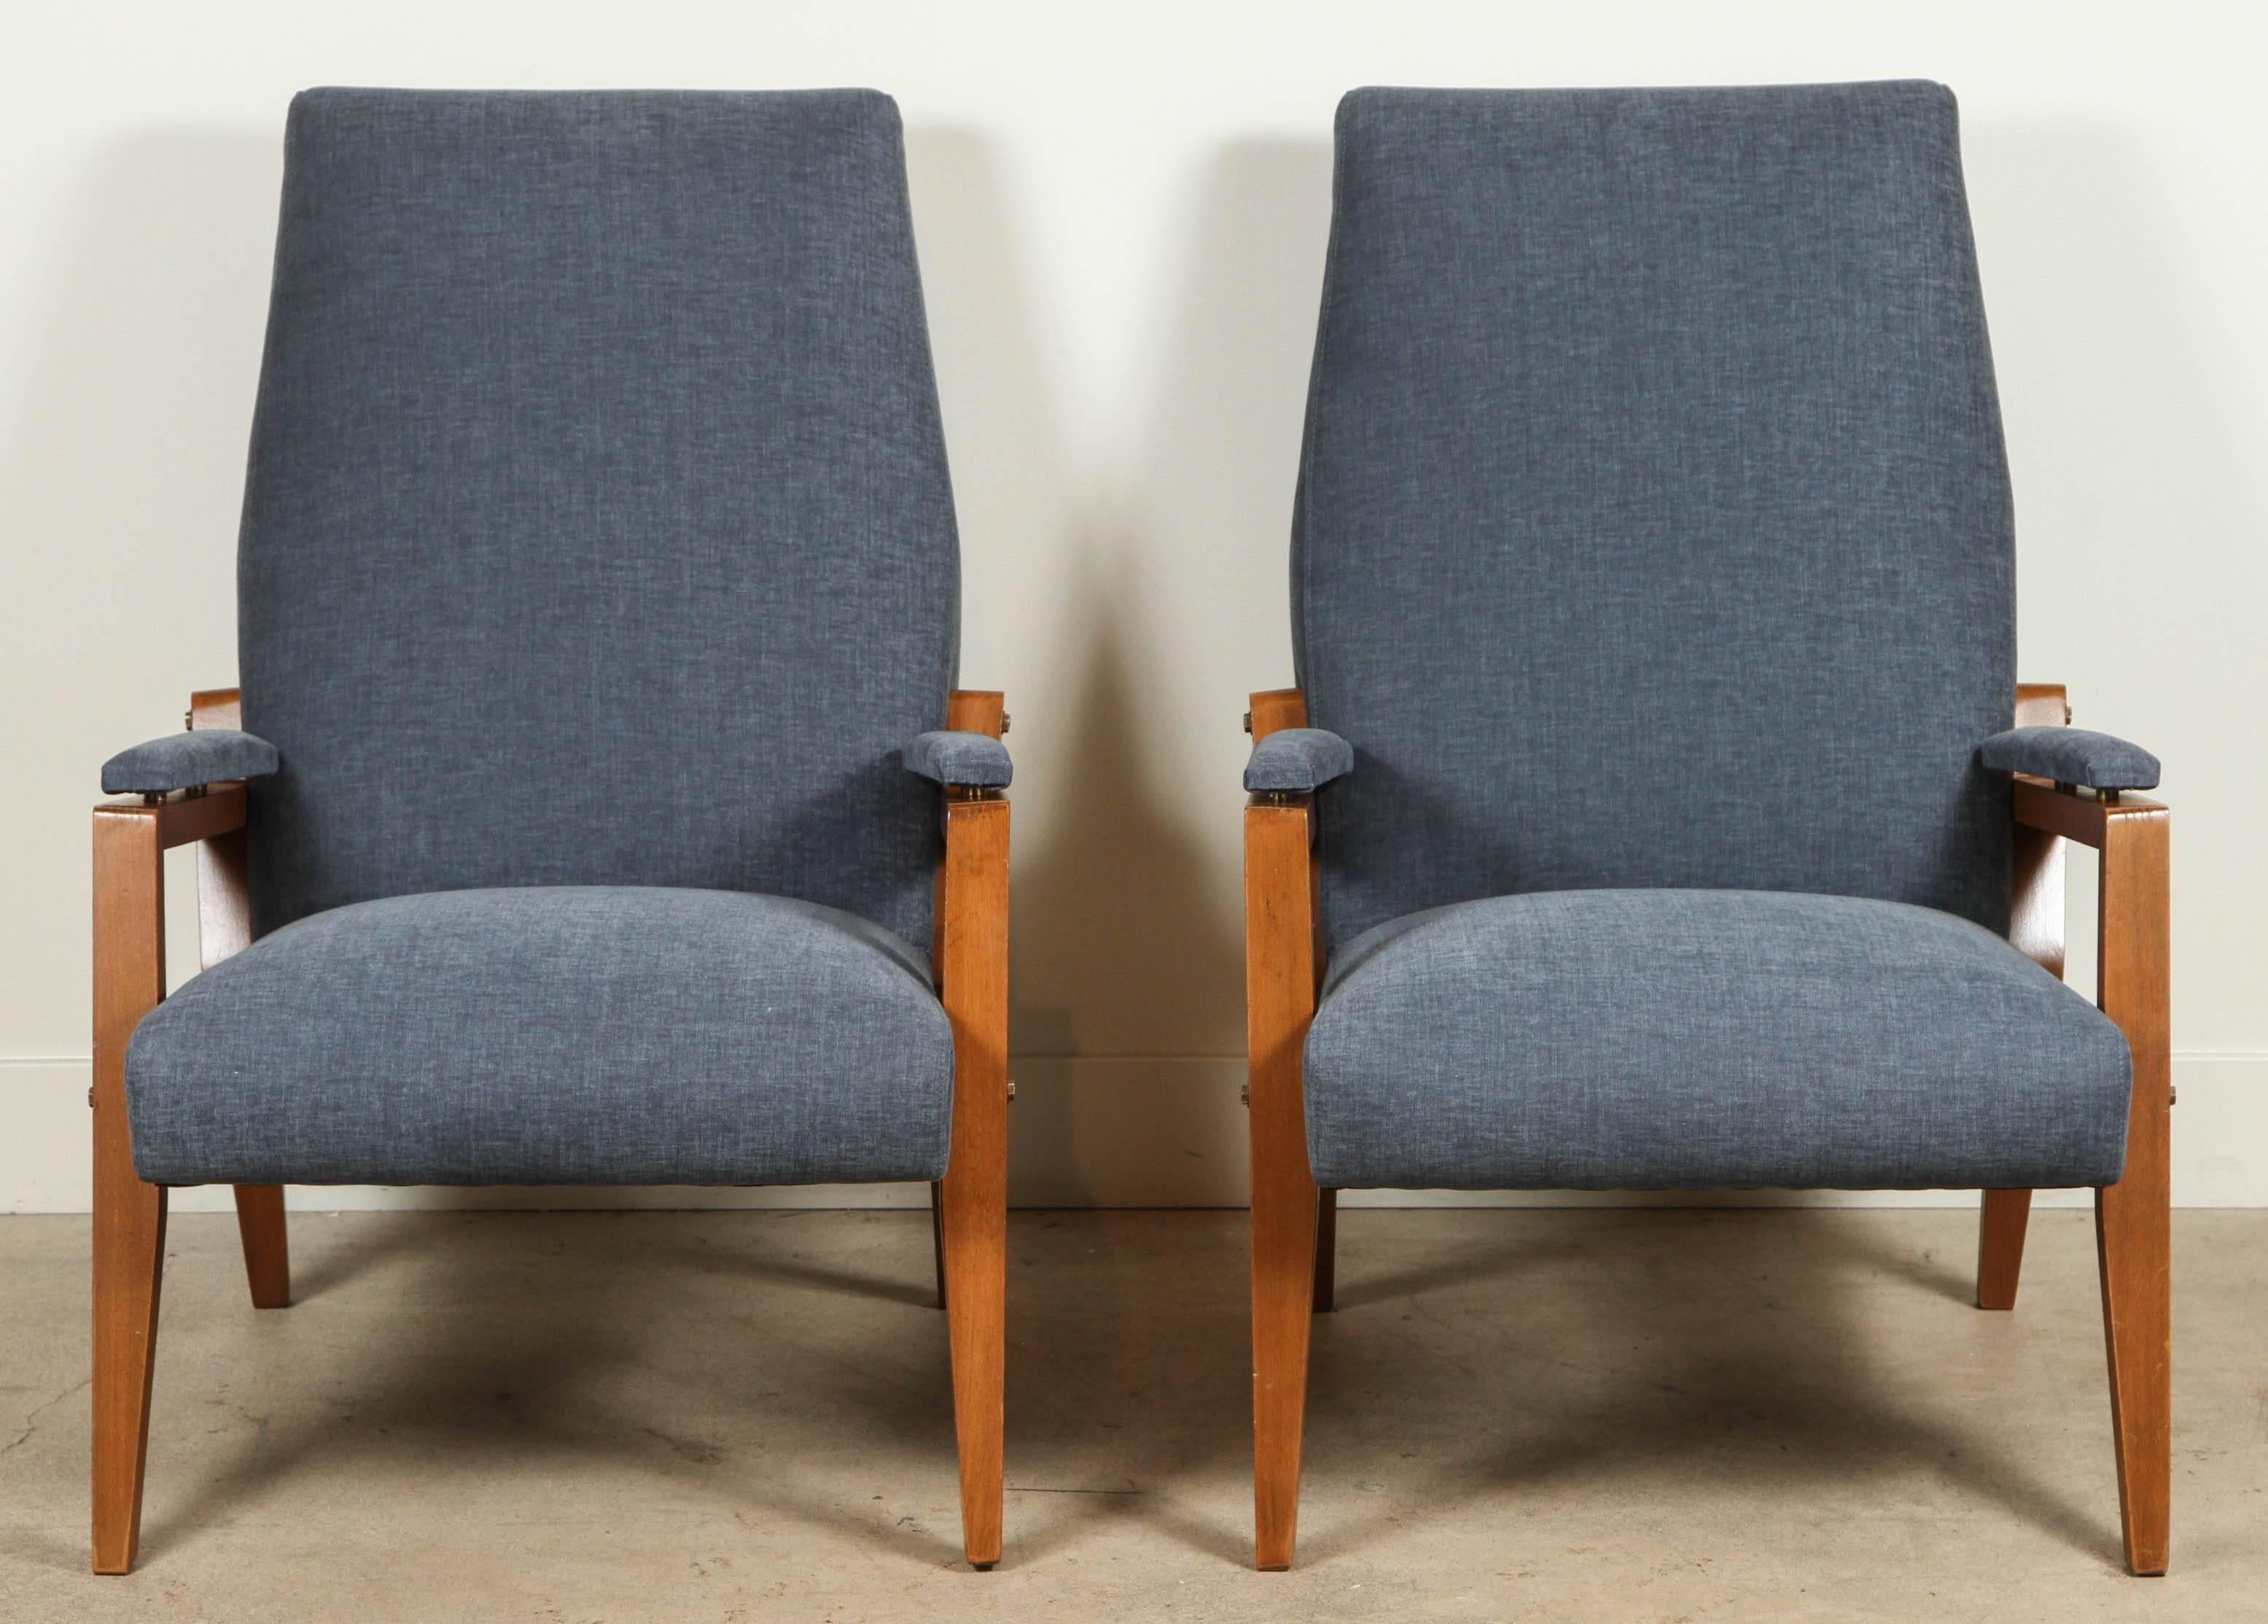 Pair of sculptural Italian fruitwood armchairs.